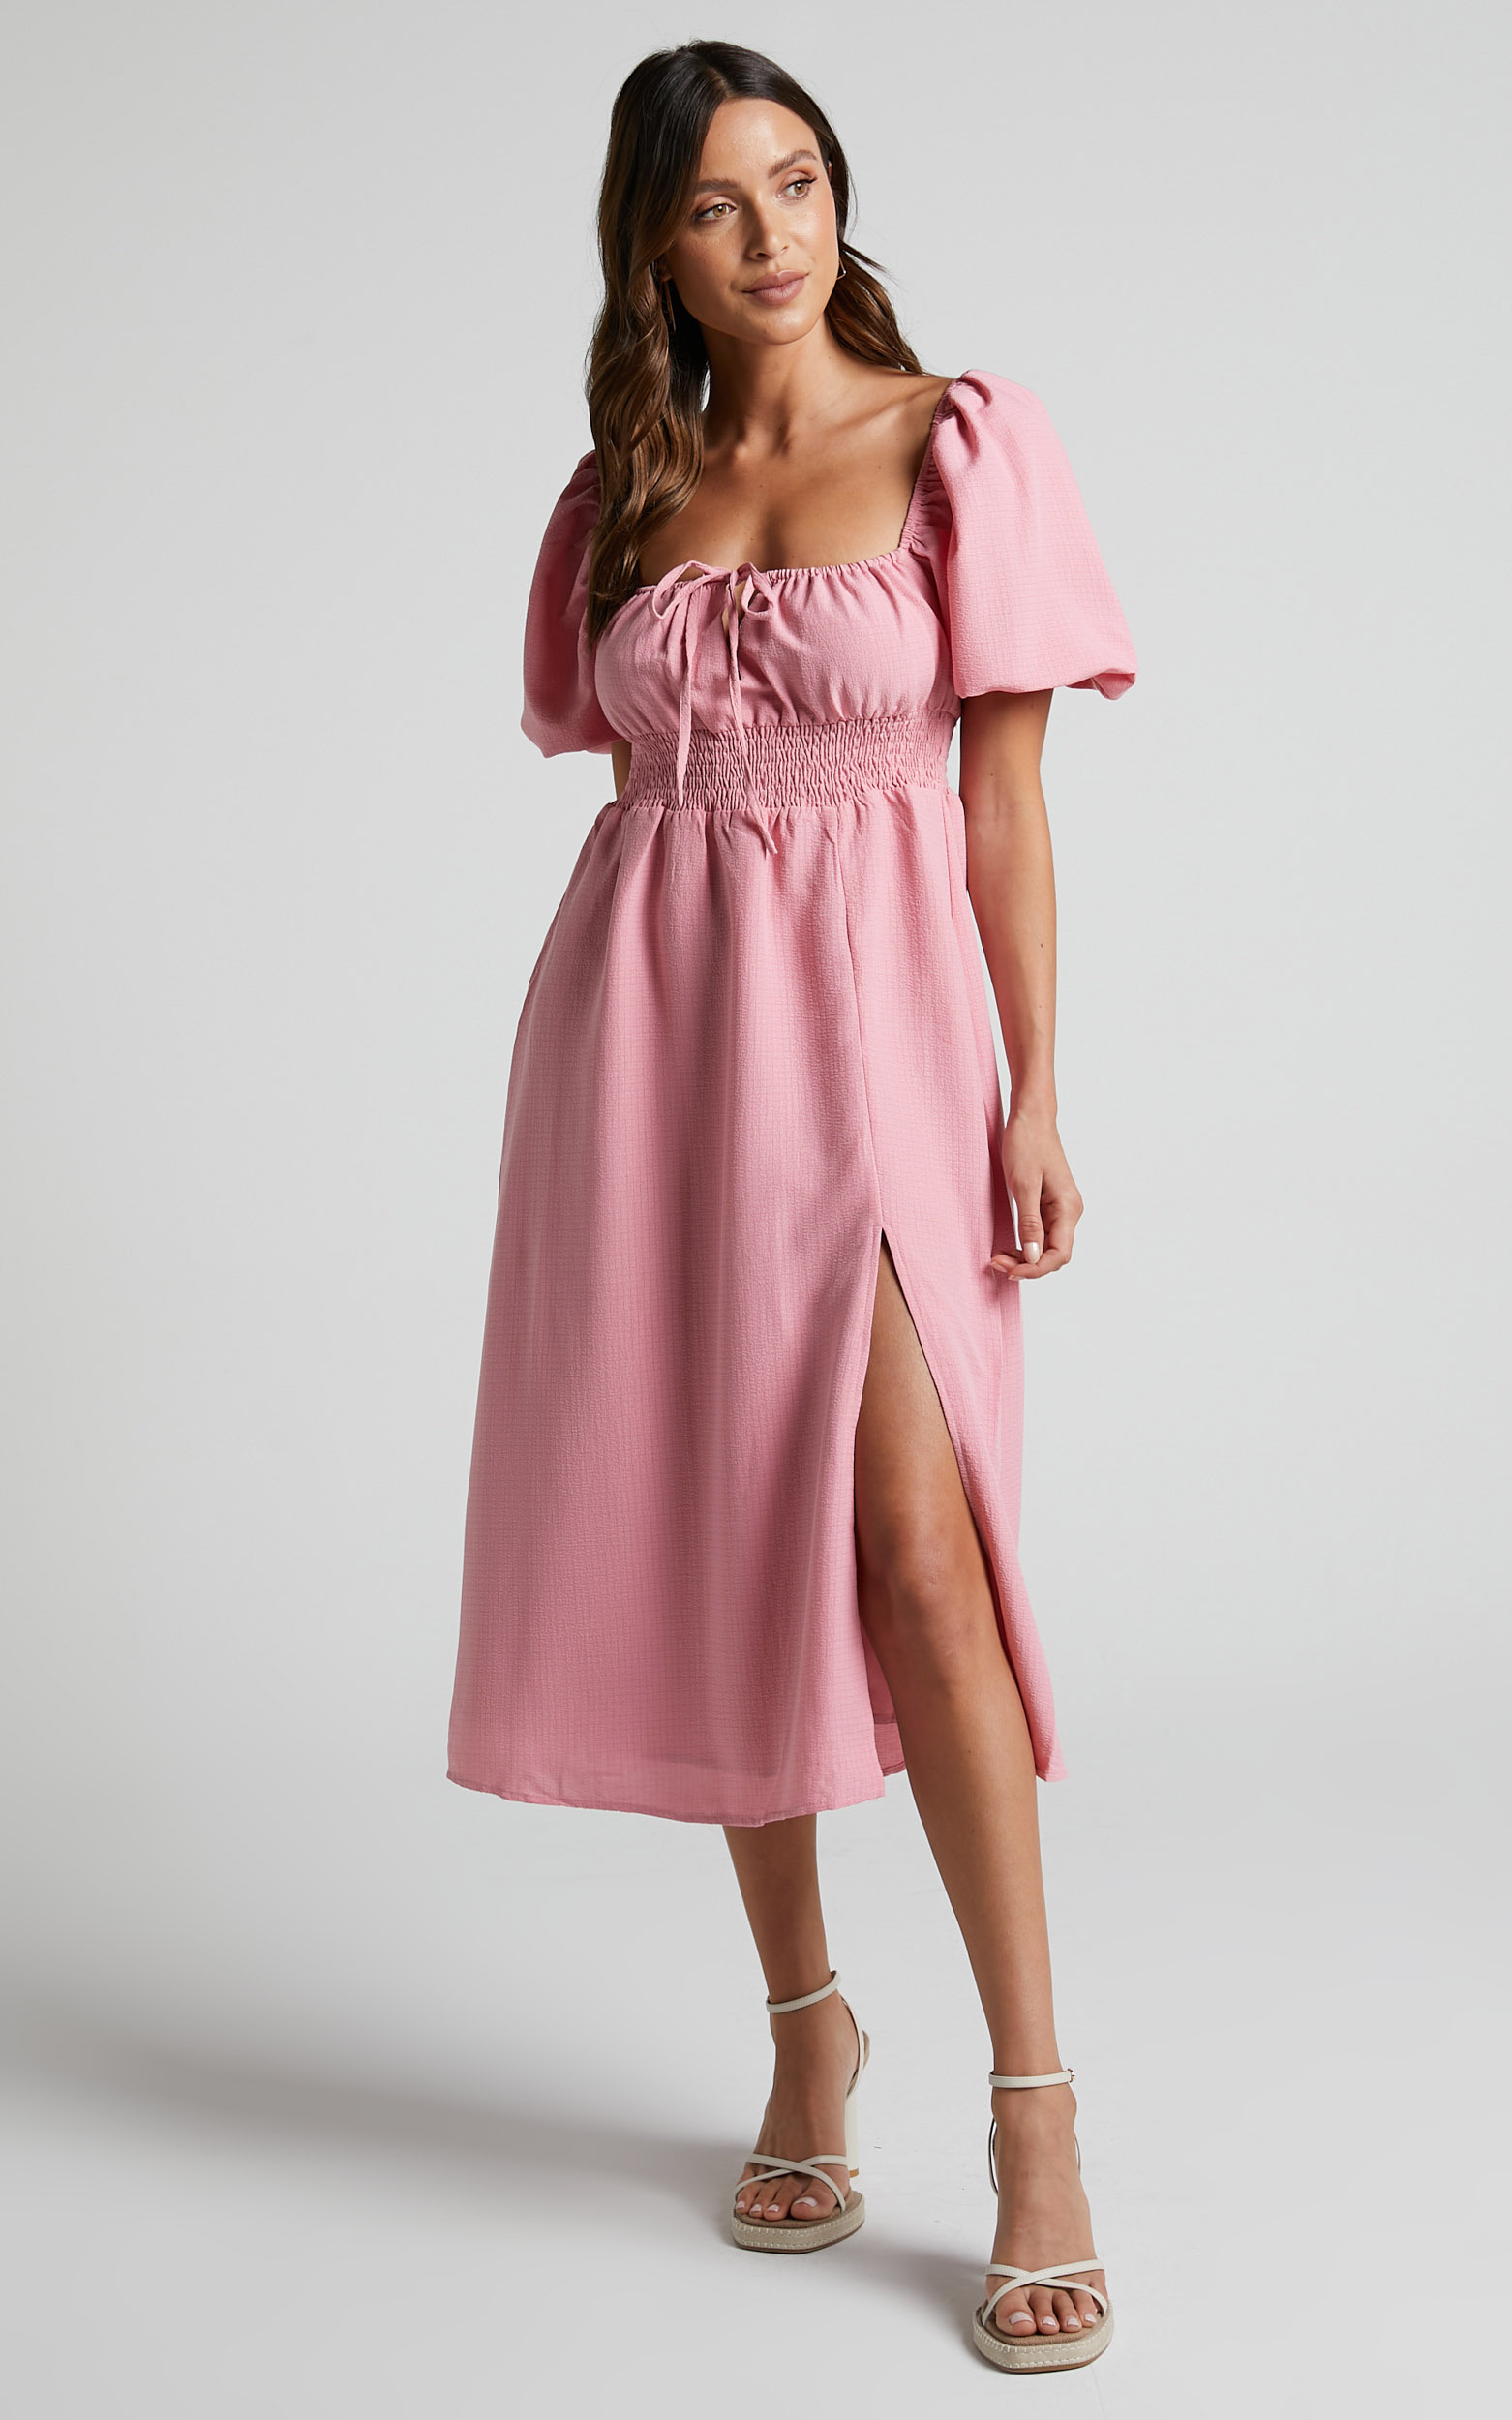 Yanet Shirred Puff Sleeve Midi Dress in Dusty Pink - 08, PNK1, hi-res image number null